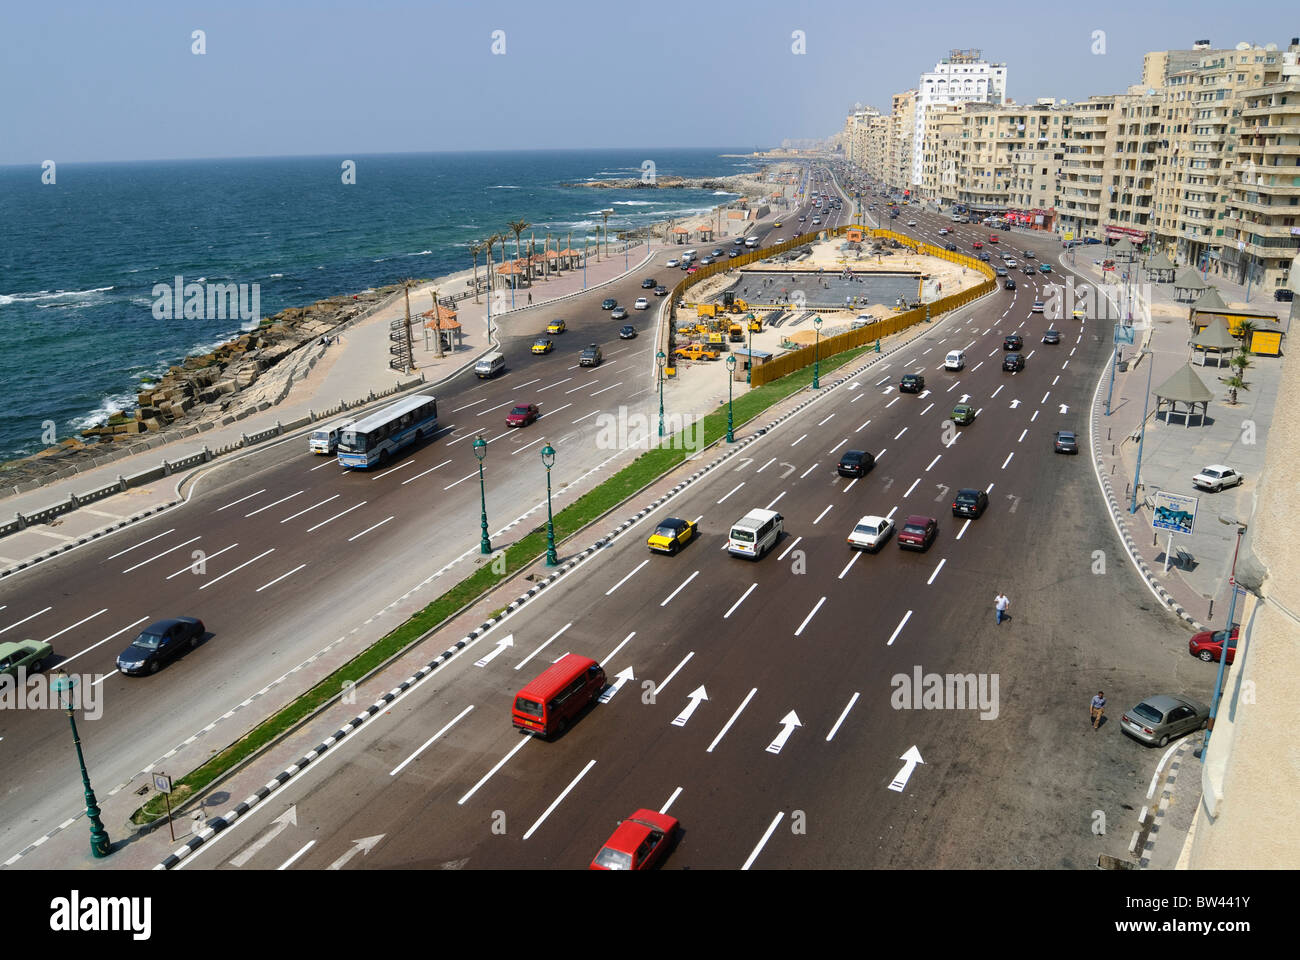 La Corniche is the main highway running along the seafront in Alexandria, Egypt. Stock Photo